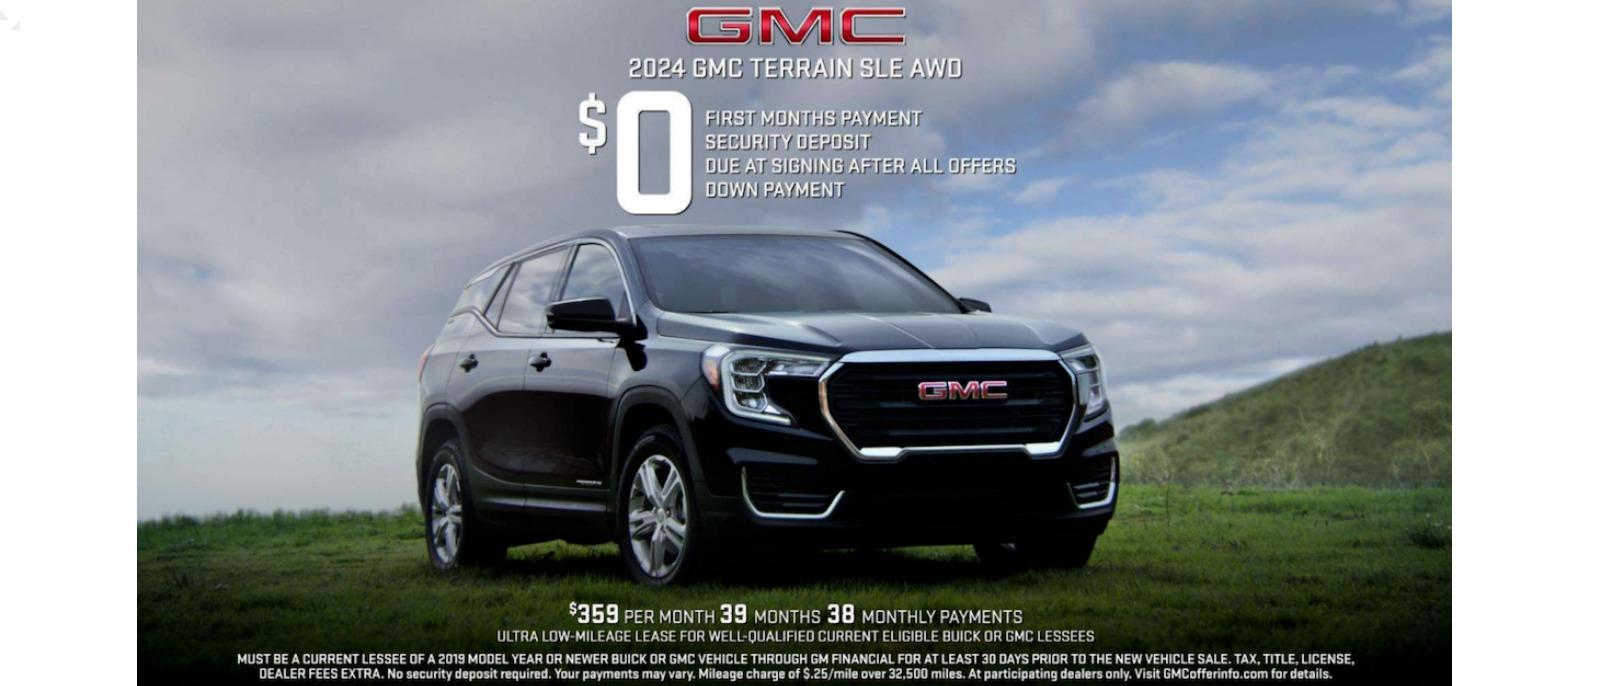 GMC 2024 GMC TERRAIN SLE AWD $0 FIRST MONTHS PAYMENT SECURITY DEPOSIT DUE AT SIGNING AFTER ALL OFFERS DOWN PAYMENT